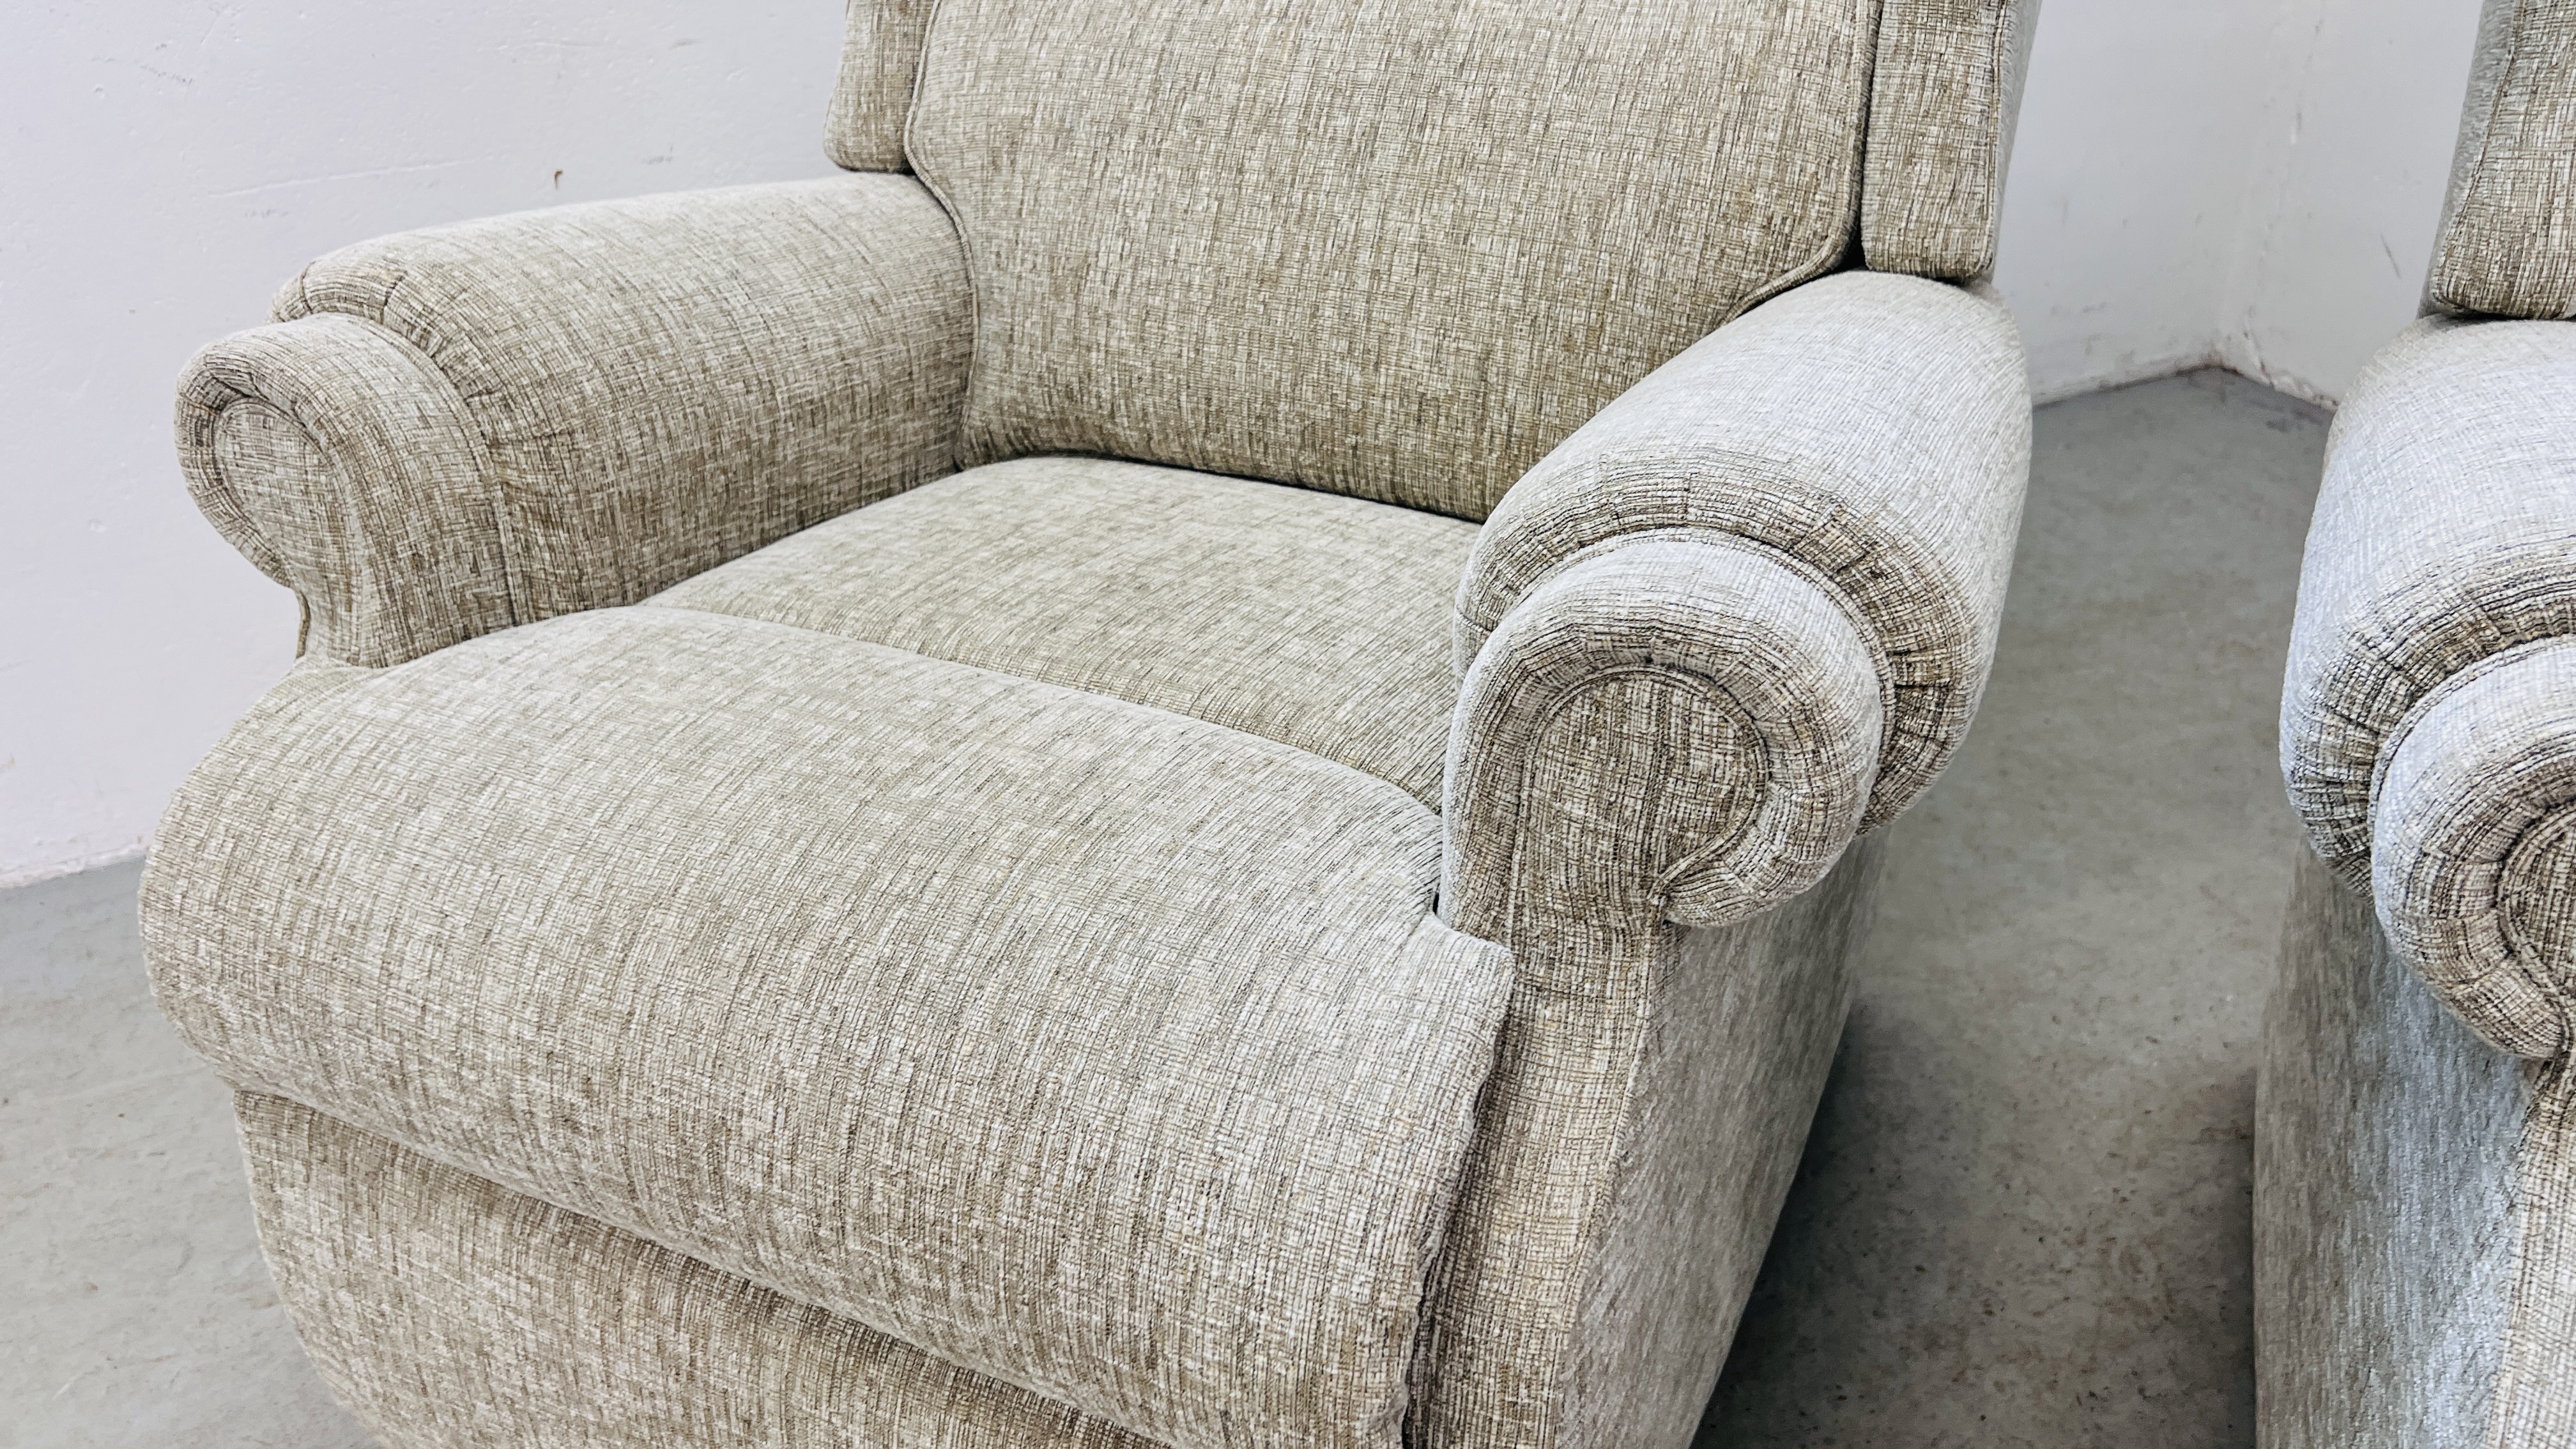 A GOOD QUALITY "SHERBORNE" TWO SEATER SOFA W 140CM X D 82CM X H 94CM ALONG WITH A MATCHING ARMCHAIR. - Image 10 of 14